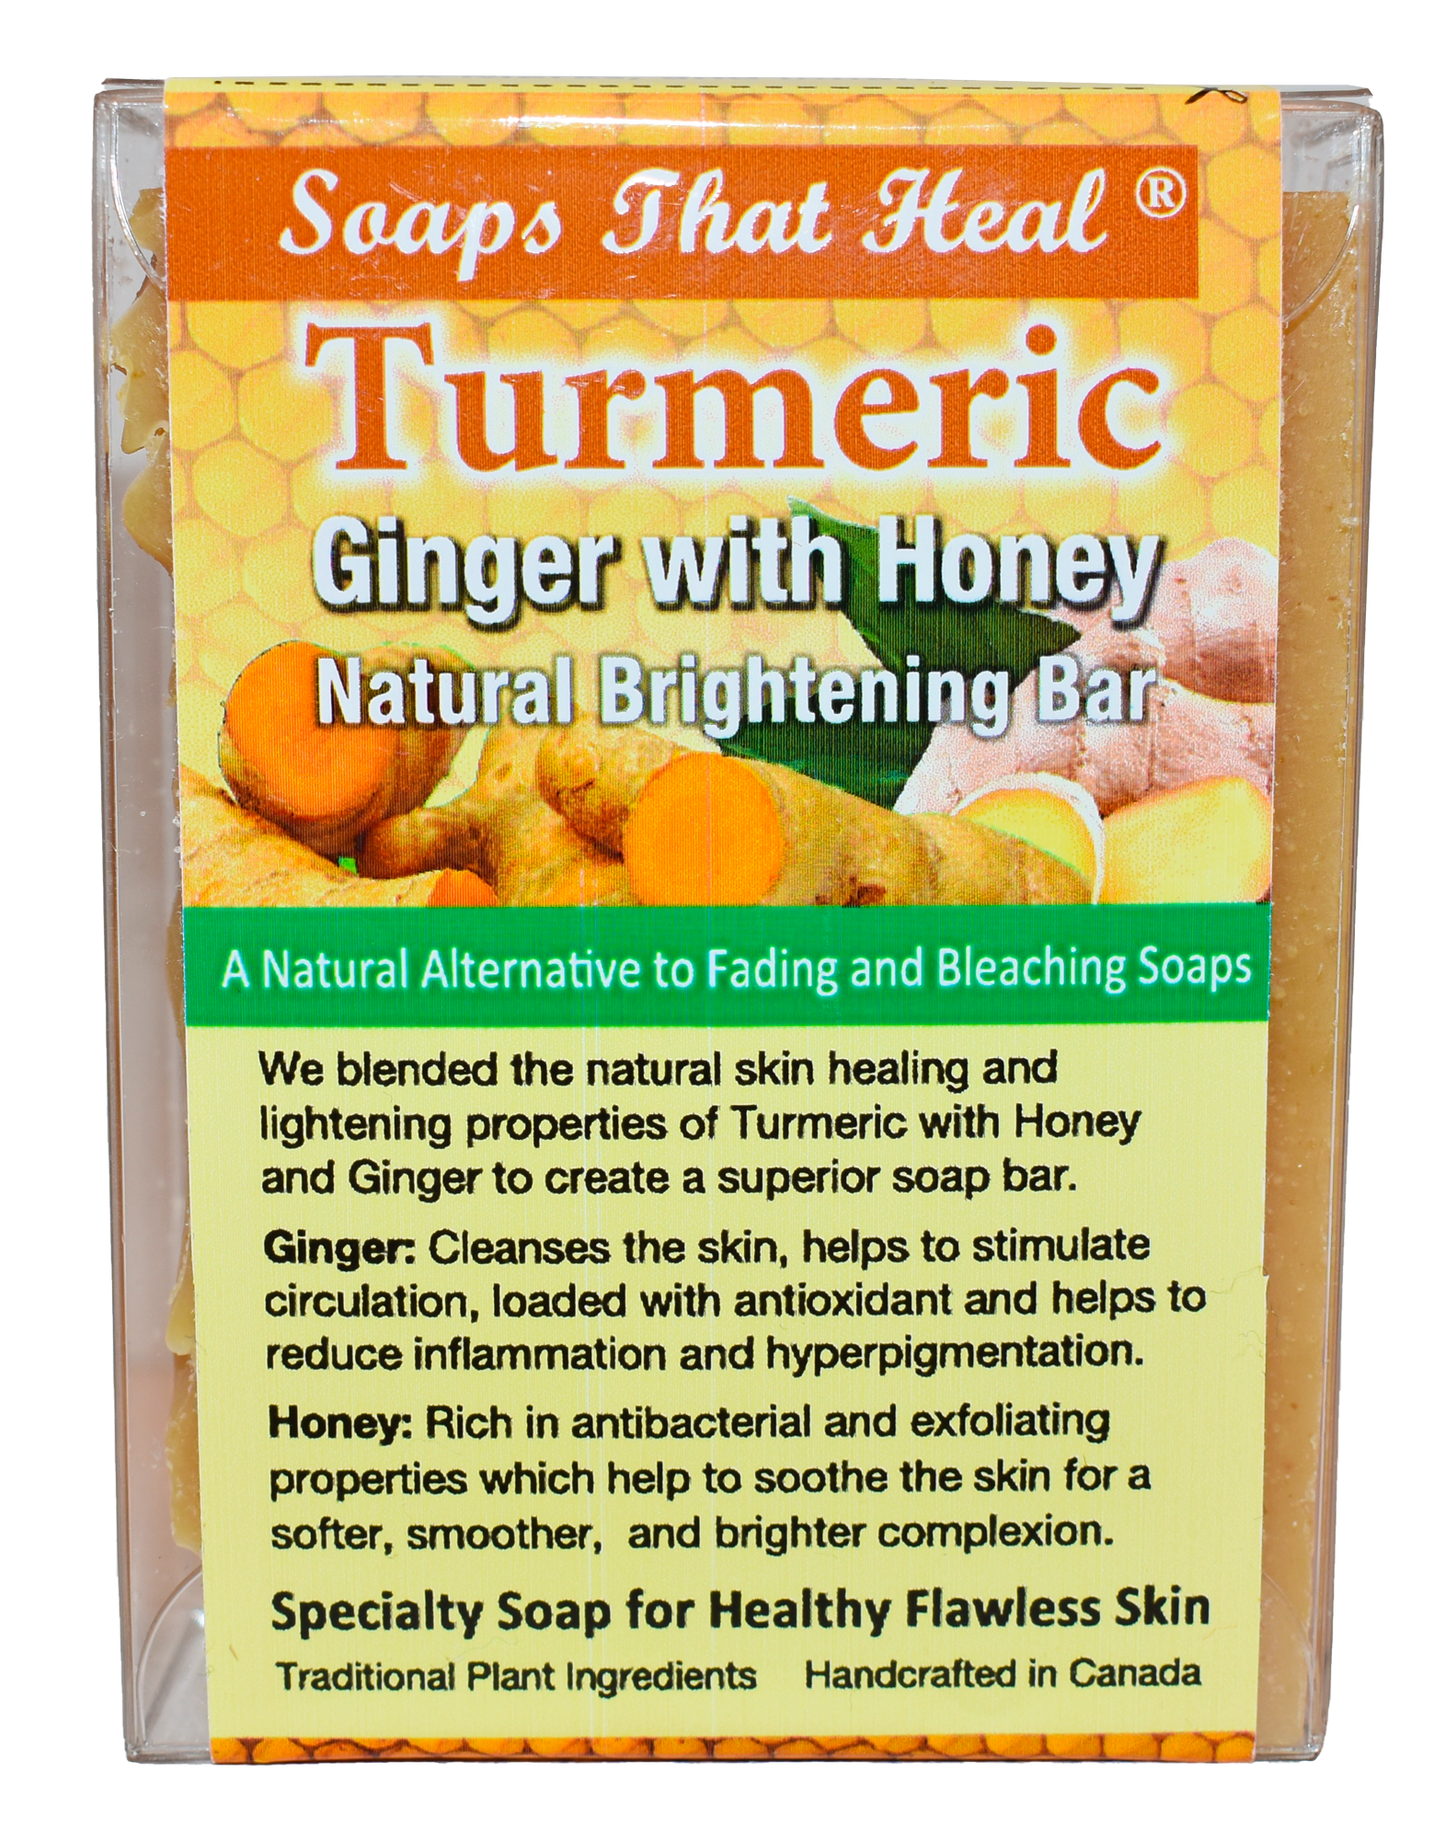 Turmeric Ginger with Honey Brightening Bar an effective solution for facial hyperpigmentation. Infused with turmeric, ginger, and honey, it helps reduce dark spots, promoting a brighter, even-toned complexion,Ginger:  Cleanses the skin, helps to stimulate circulation, loaded with antioxidant and helps to reduce inflammation and hyperpigmentation.  Honey:  Rich in antibacterial and exfoliating properties which help to soothe the skin for a softer, smoother,  and brighter complexion. cold press,soap